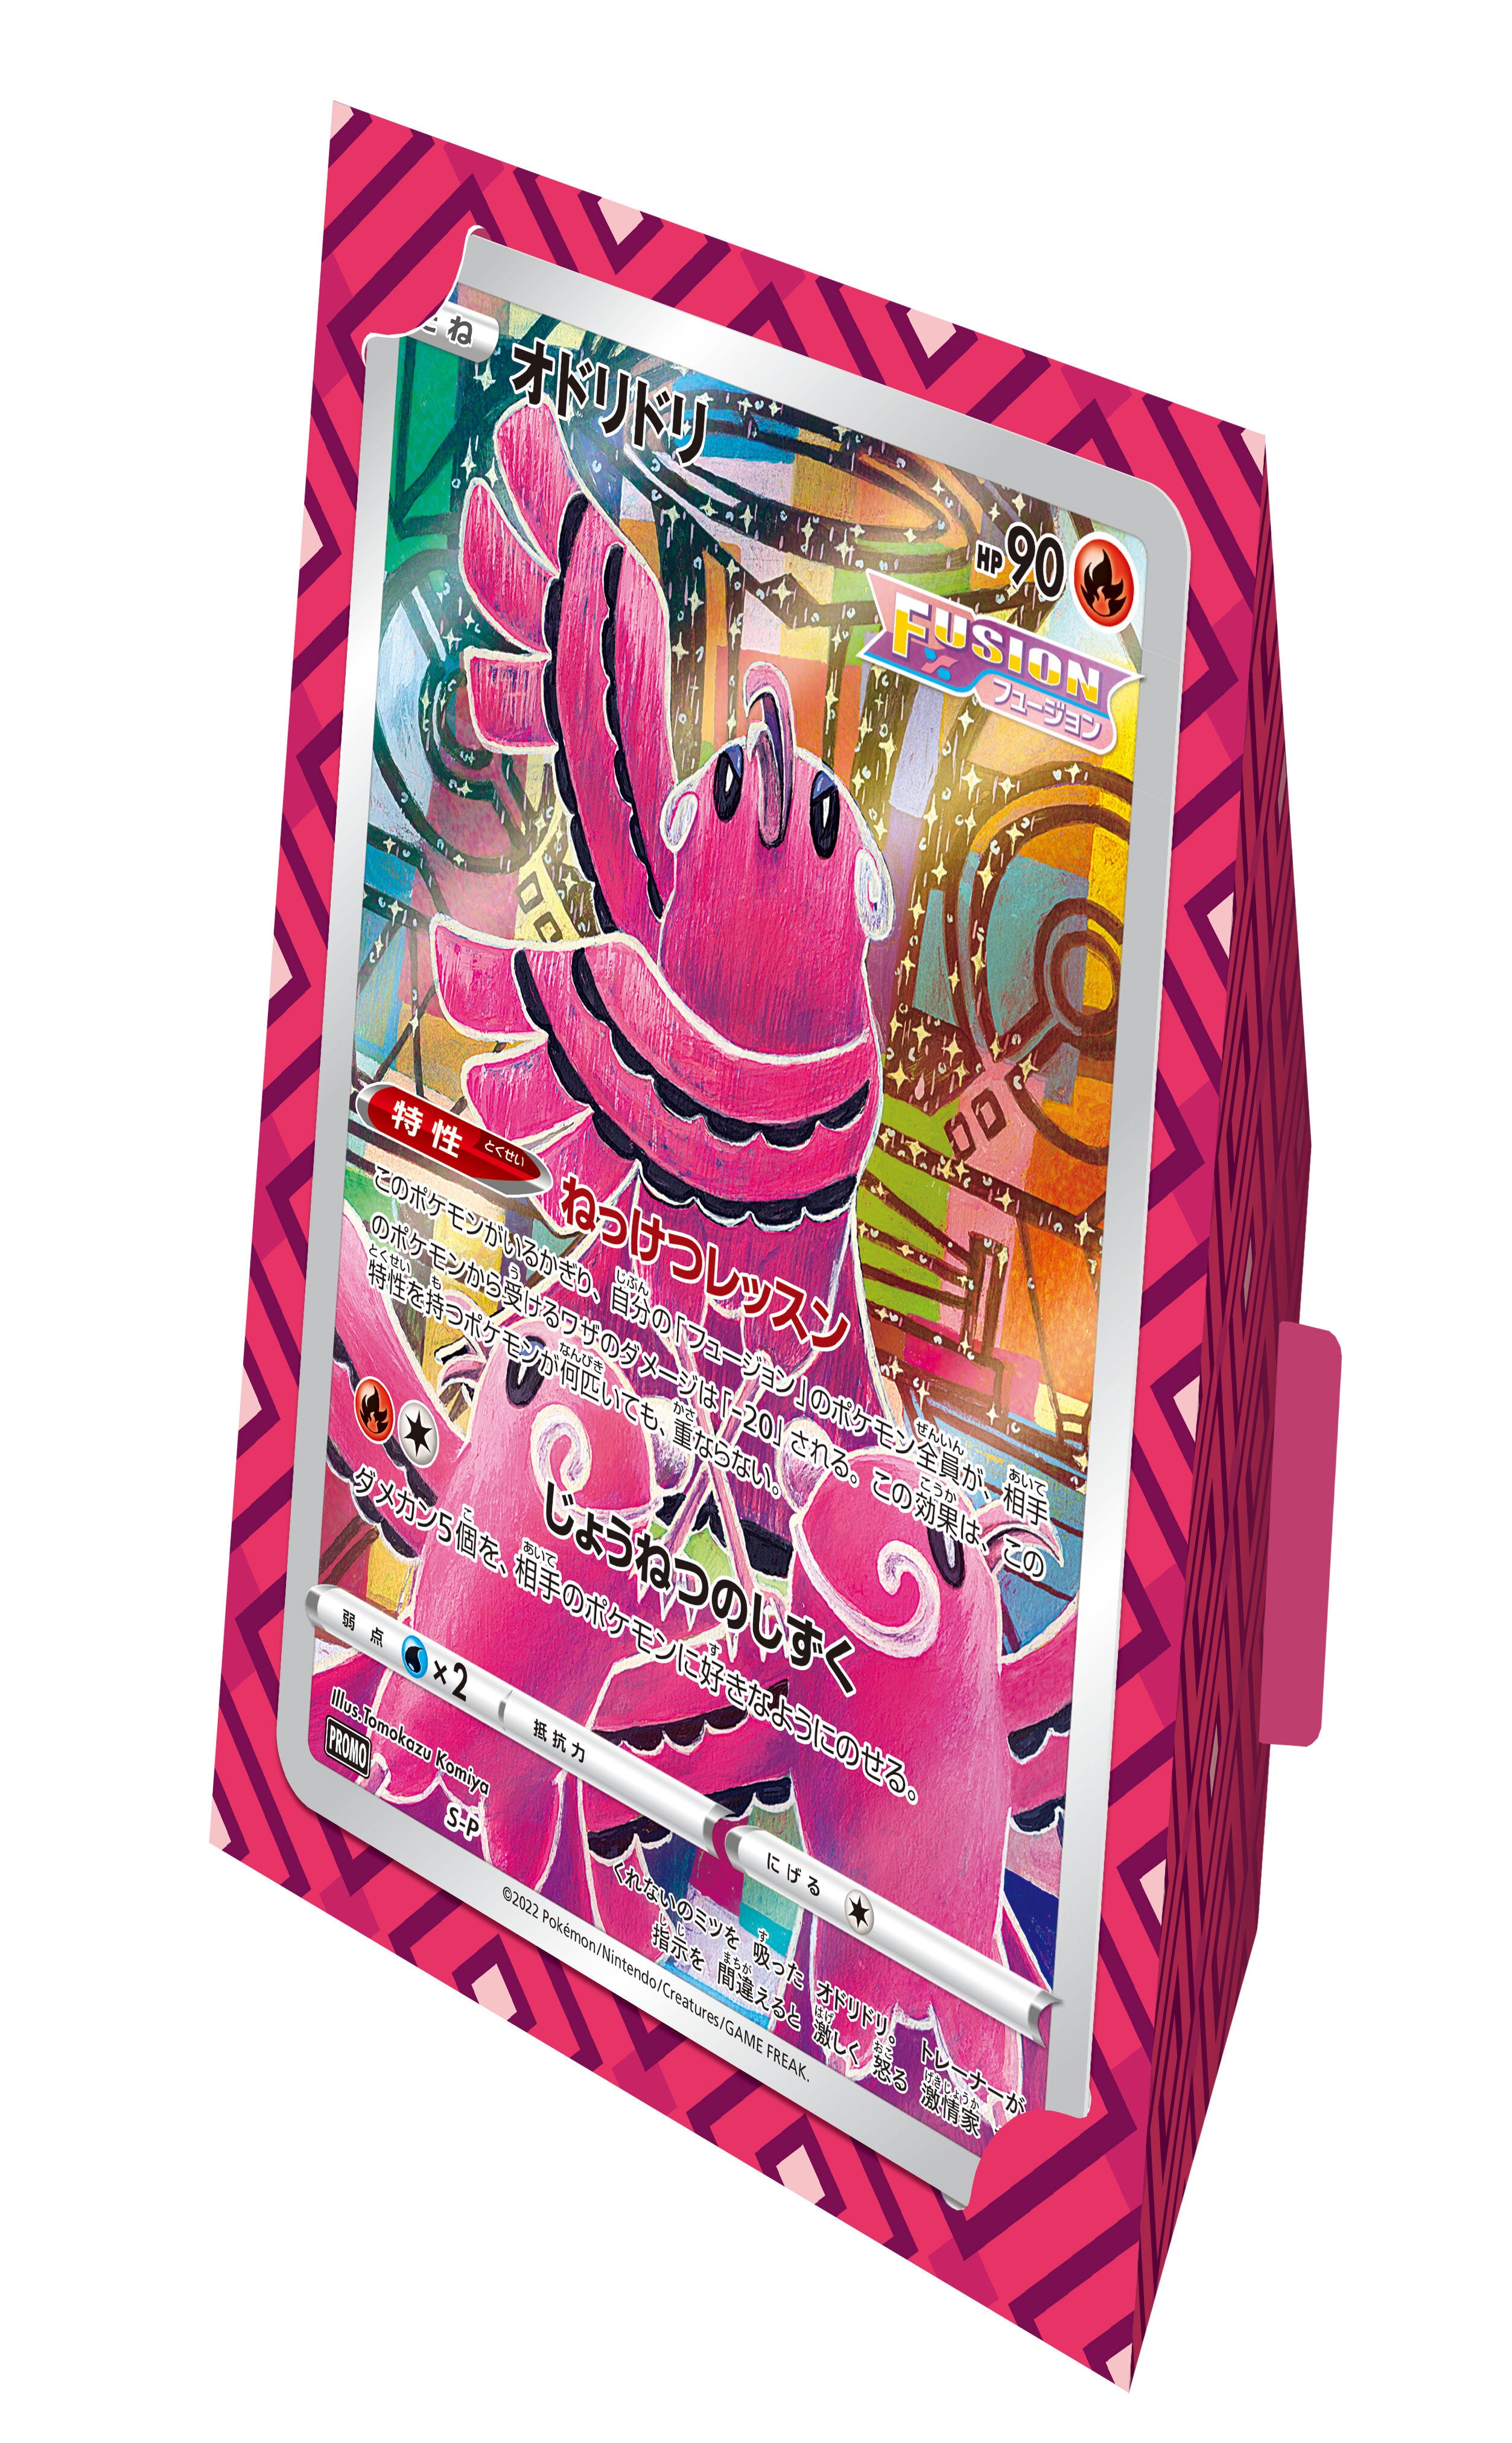 POKÉMON CARD GAME Sword & Shield JUMBO CARD COLLECTION ｢Mew｣  Release date: December 16 2022  Contain:      Jumbo card ｢Mew｣ ｢Oricorio｣ ×1     High Class pack [s12a] ｢VSTAR UNIVERSE｣ ×3     Card stand ×2  ※ Each High Class pack contains 10 random cards.